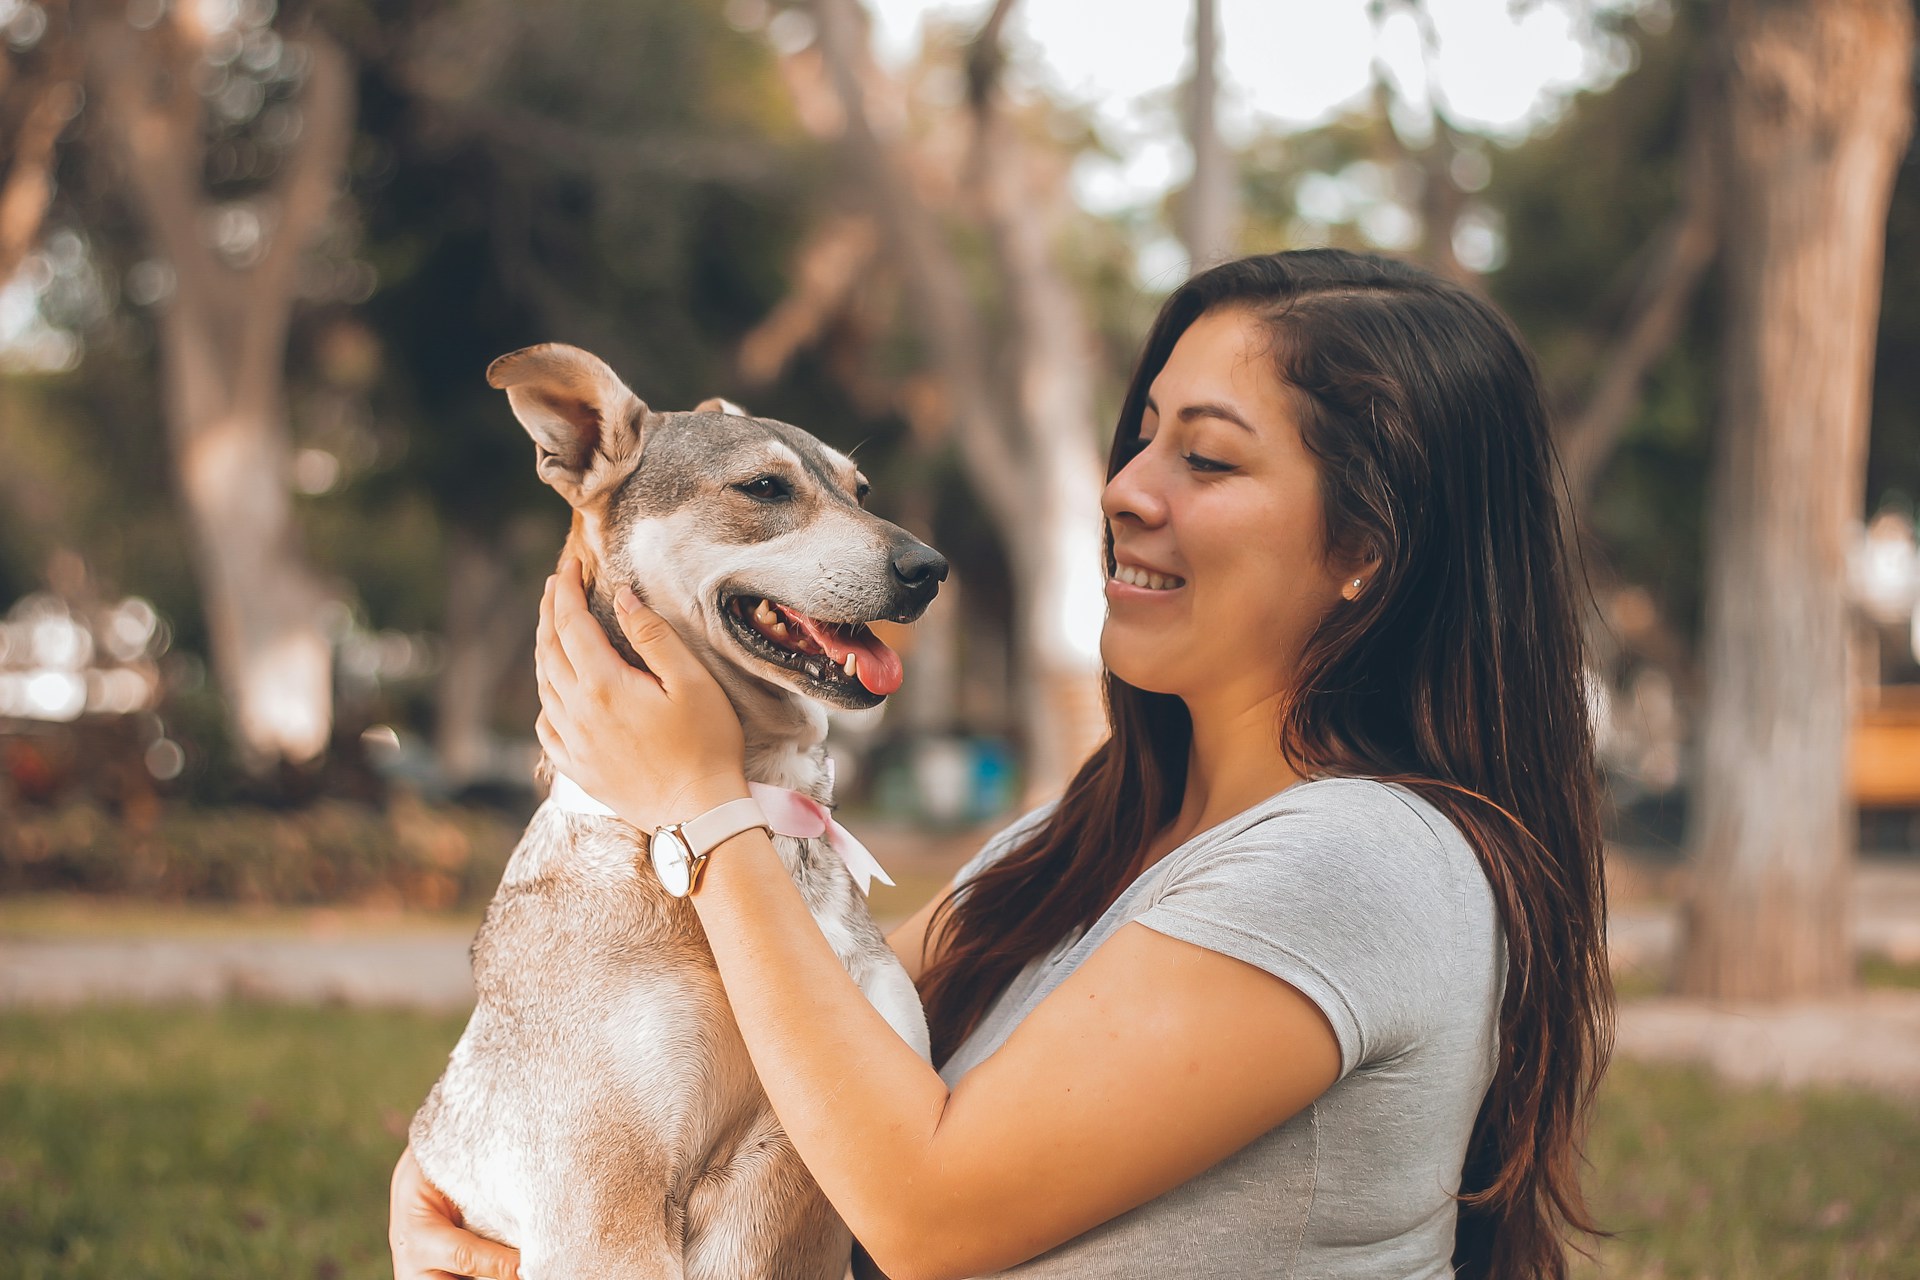 woman smiling and holding dog in a park